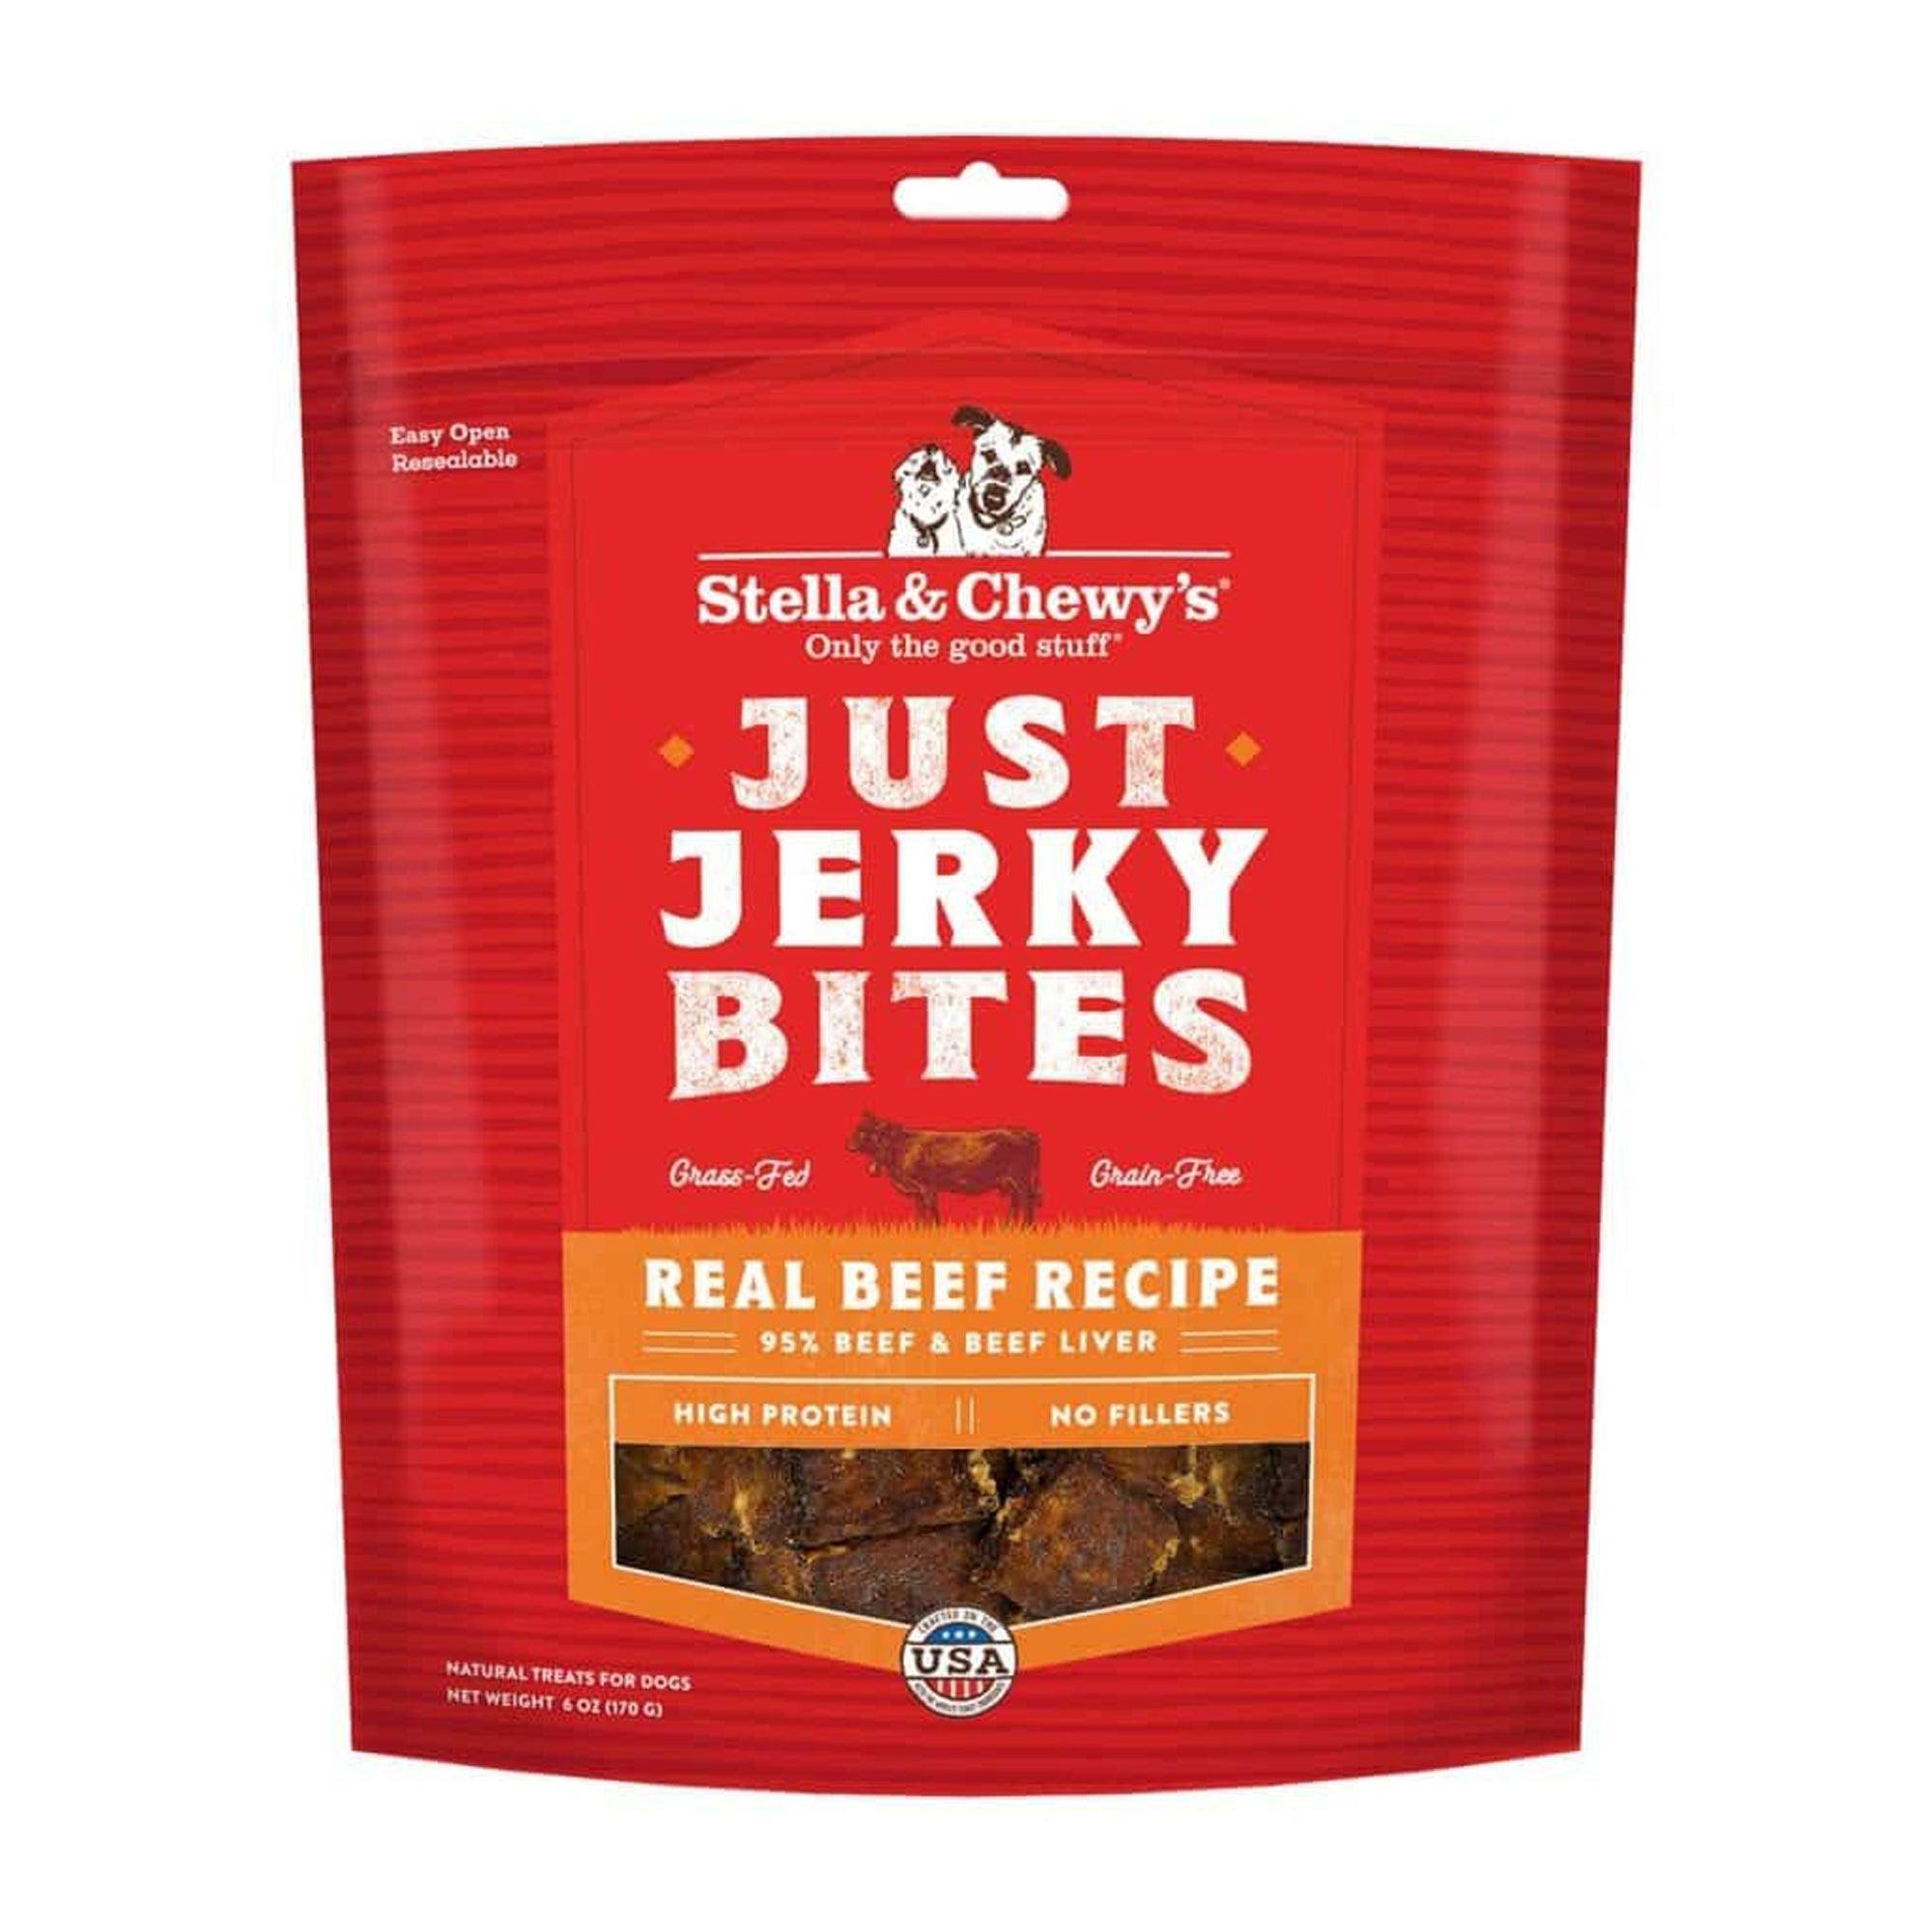 Stella & Chewy's Just Jerky Bites Real Beef Recipe Dog Treats, 6 oz Bag